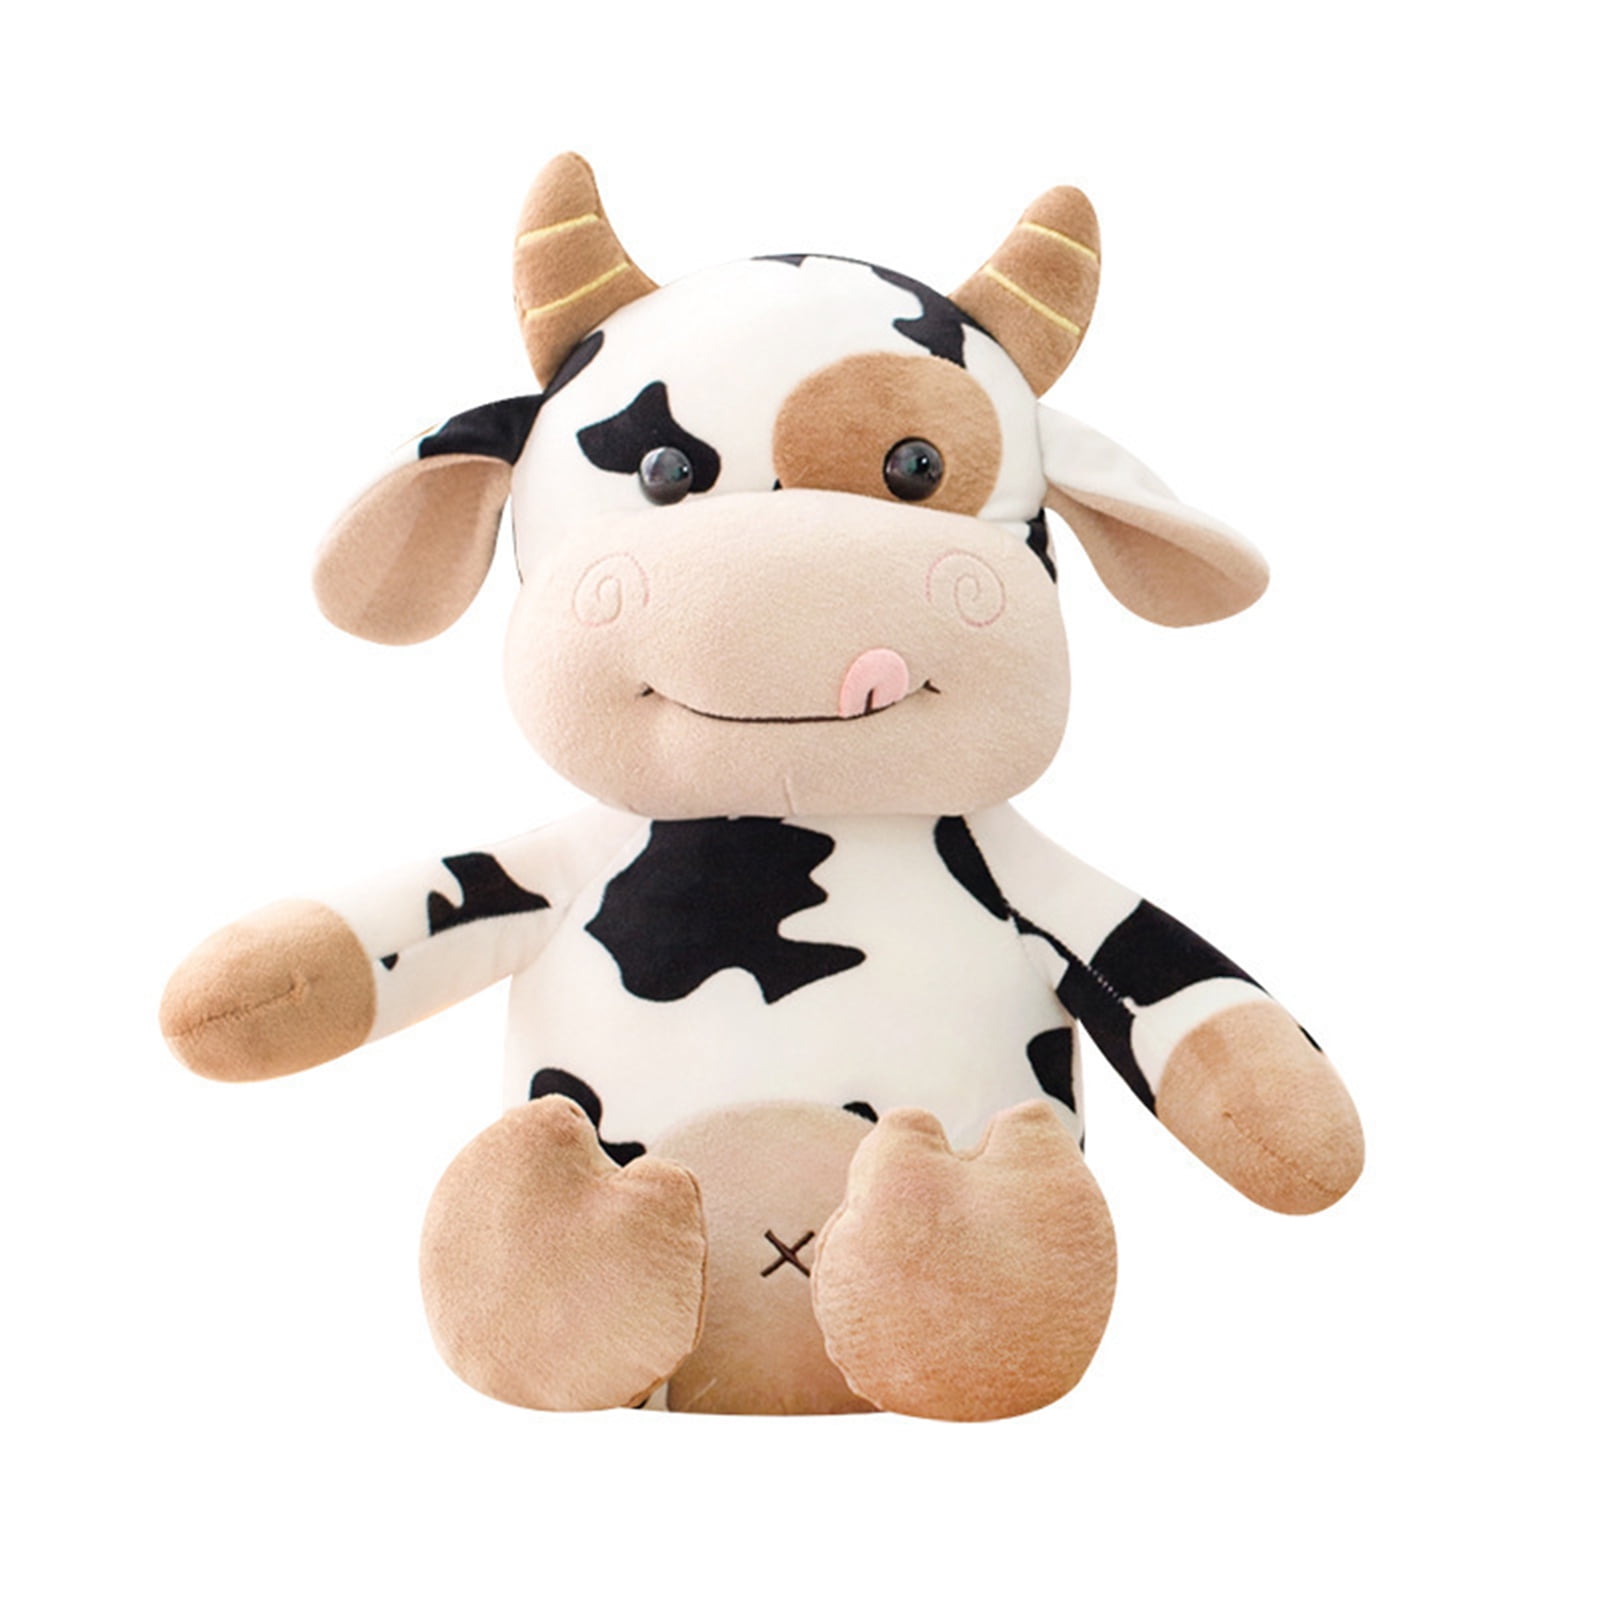 Details about   Cow Plush Toy Soft Pillow Stuffed Animal Cartoon Toy Doll Chirdren Birthday Gift 